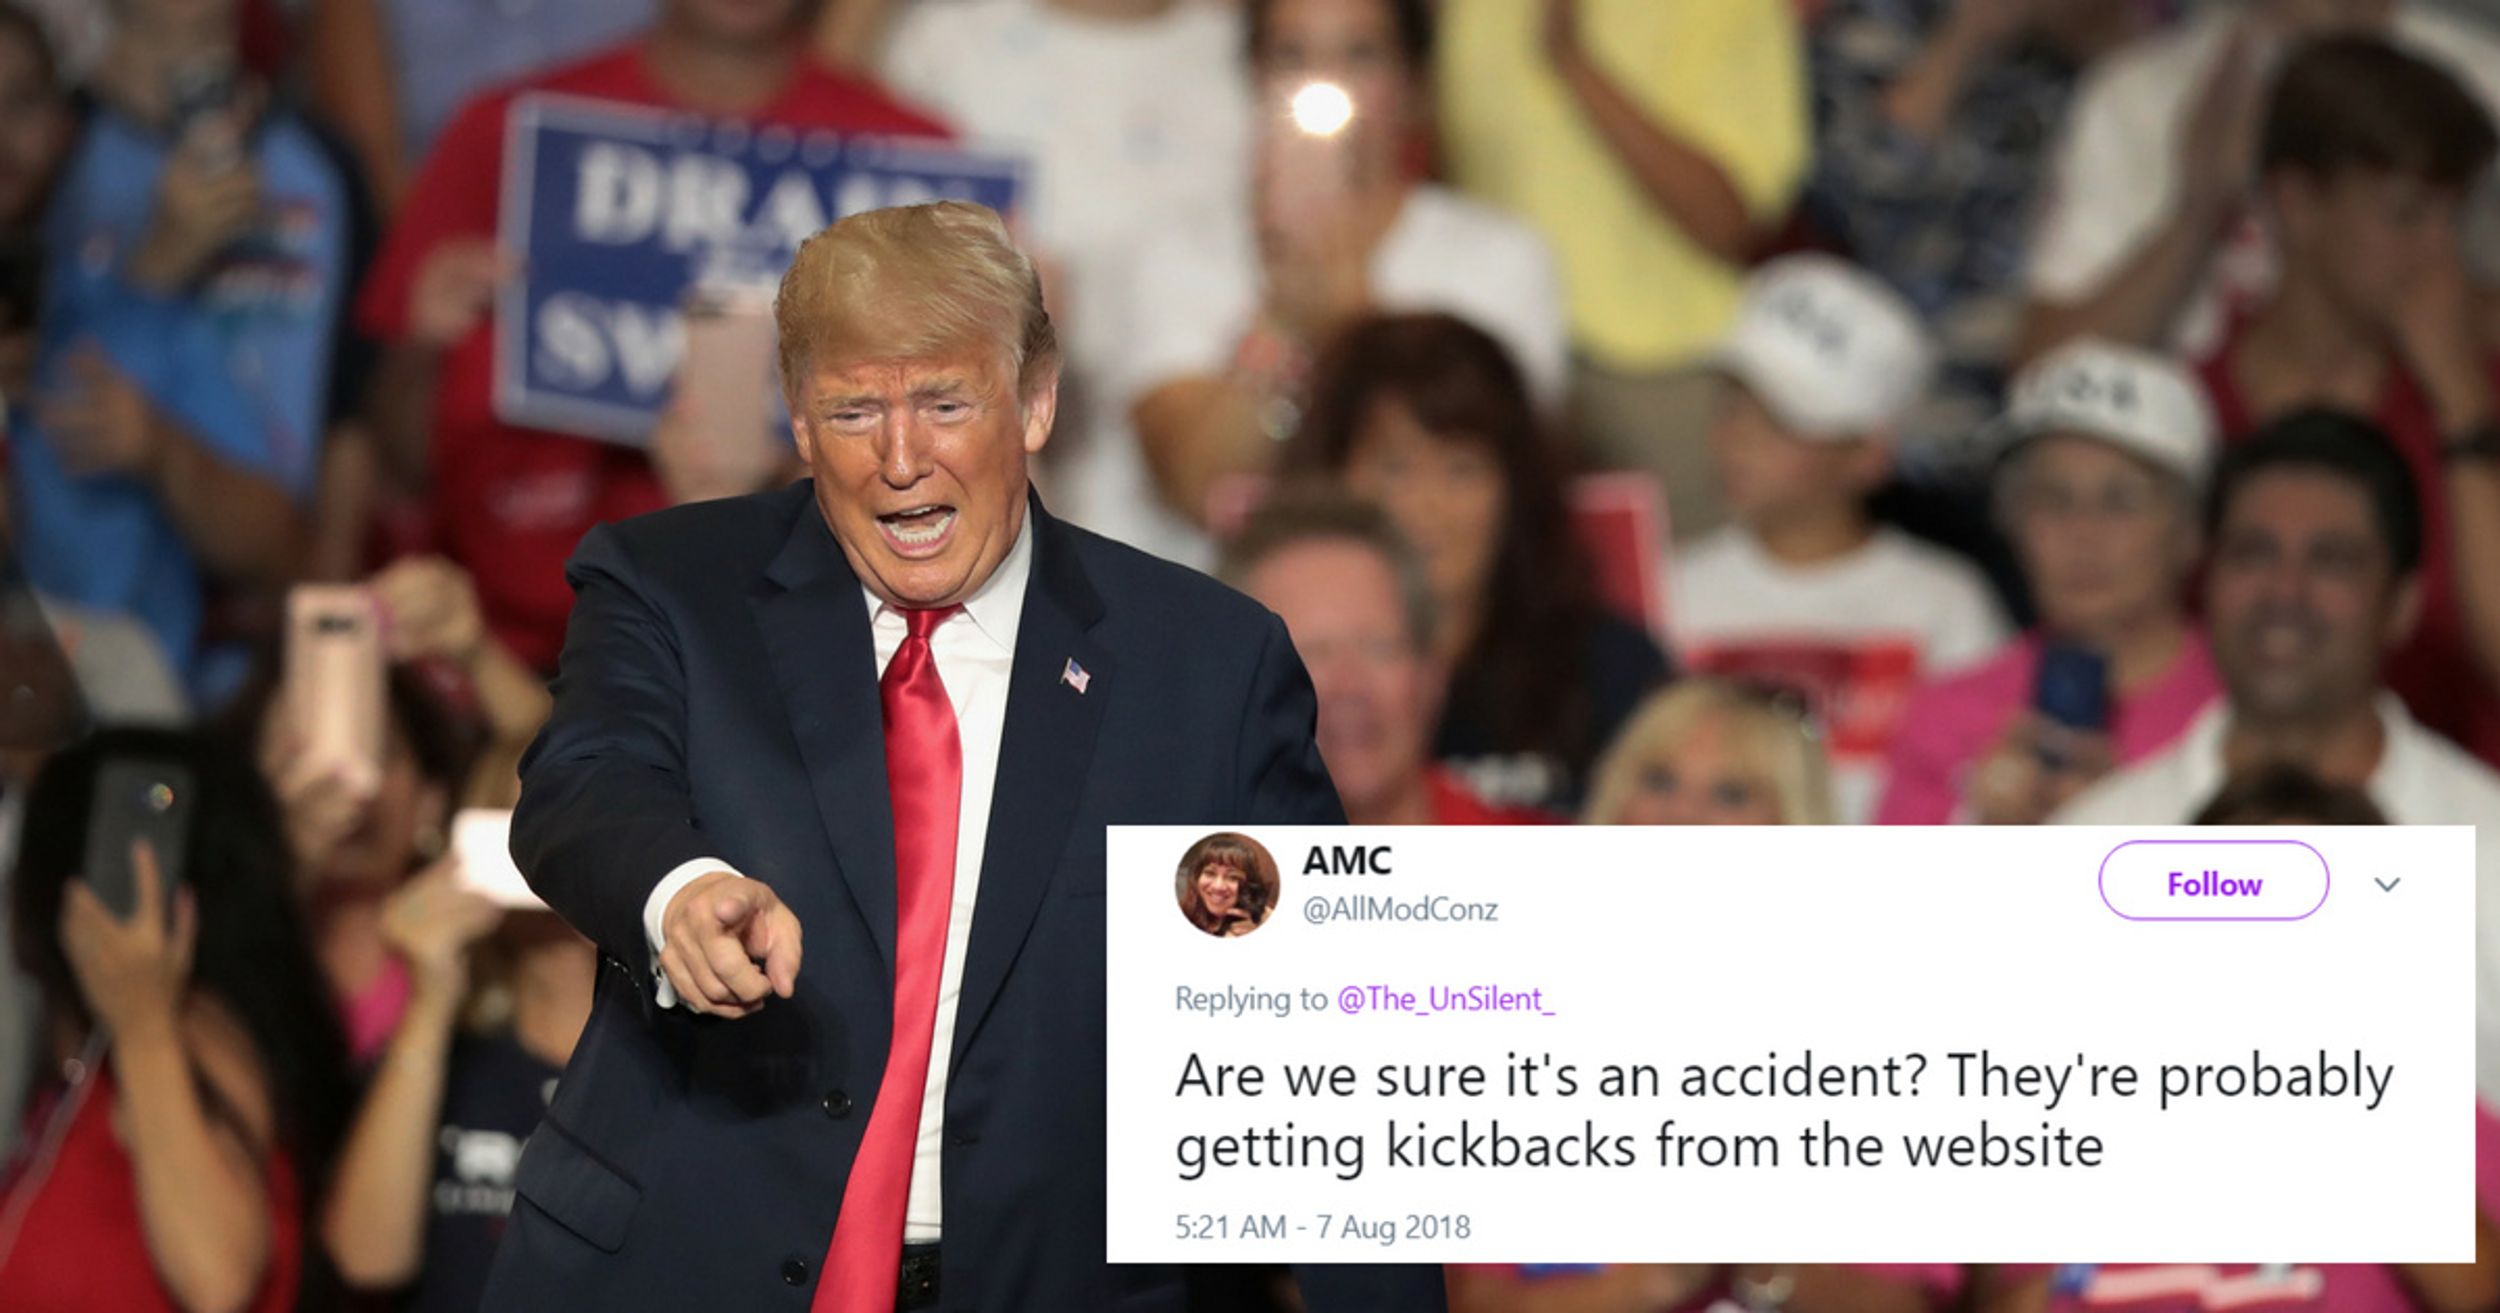 The RNC's Official Website Was Accidentally Linked To A Very NSFW Twitter Account For Months 😮